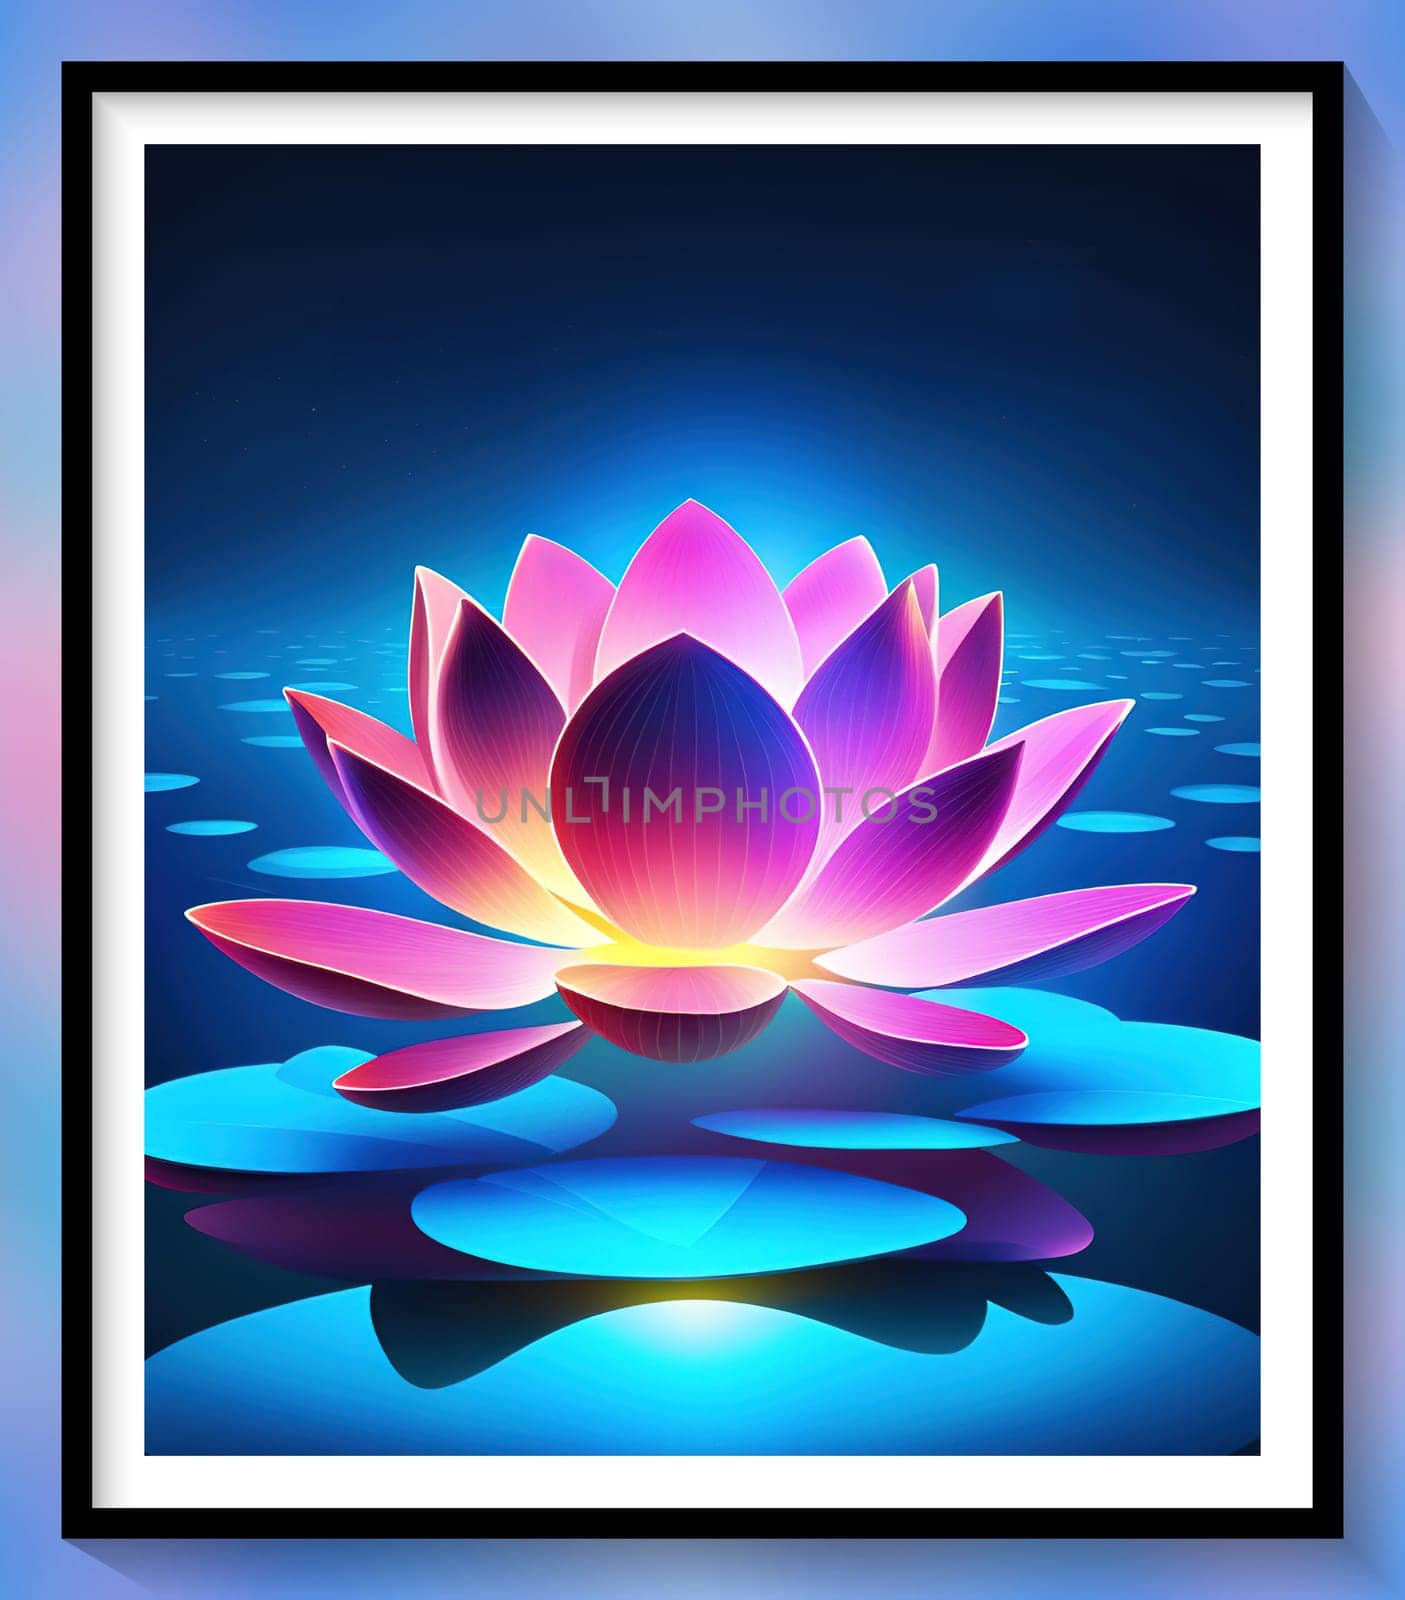 Beautiful lotus flower on dark blue background. Vector illustration.Beautiful blue lotus flower on the background of the night sky